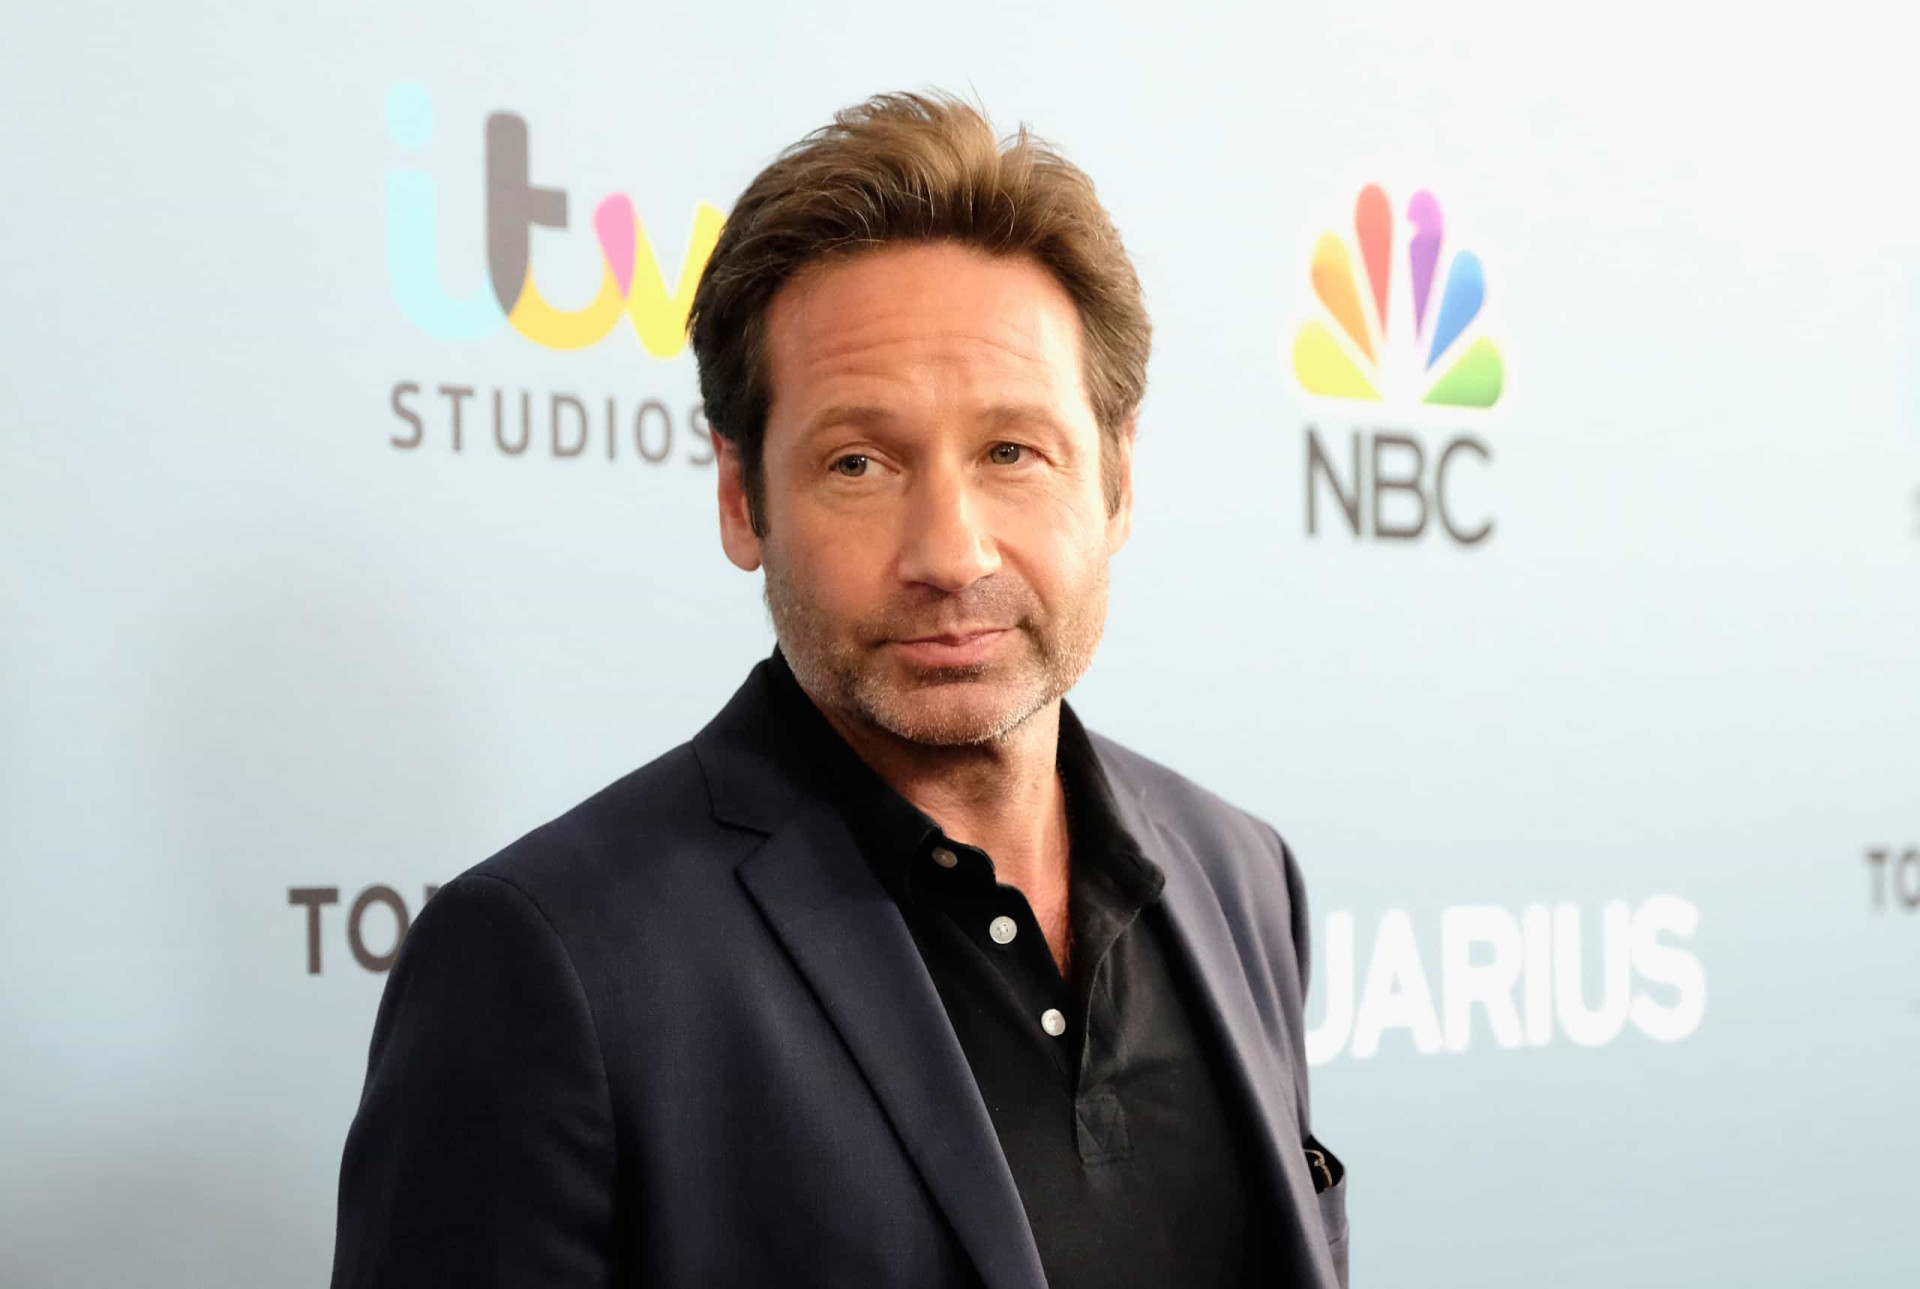 <p>David Duchovny shared his close encounter with Scientology in an interview with The Daily Beast. The actor was attending the wedding of a Scientologist friend, actor Jason Beghe, back in 2000. The wedding was held at the church's Celebrity Centre in Los Angeles and members approached him to attempt recruitment. Duchovny admitted that he tried out some of their famed "auditing" procedures, but he quickly decided it wasn't from him when they started asking extremely personal questions. His friend Beghe eventually quit Scientology and branded the church a cult.  </p><p><a href="https://www.msn.com/en-us/community/channel/vid-7xx8mnucu55yw63we9va2gwr7uihbxwc68fxqp25x6tg4ftibpra?cvid=94631541bc0f4f89bfd59158d696ad7e">Follow us and access great exclusive content every day</a></p>